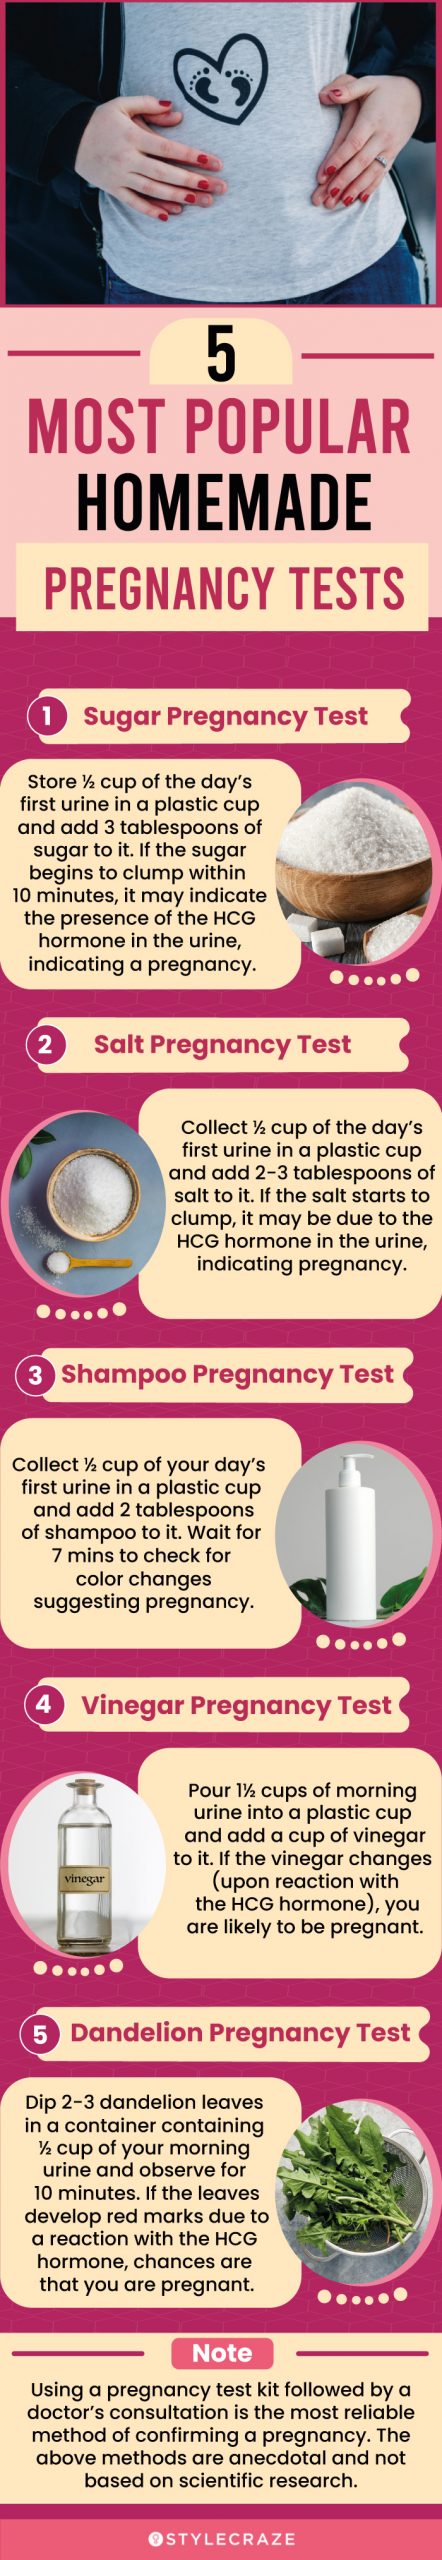  top 5 most popular homemade pregnancy tests (infographic) 